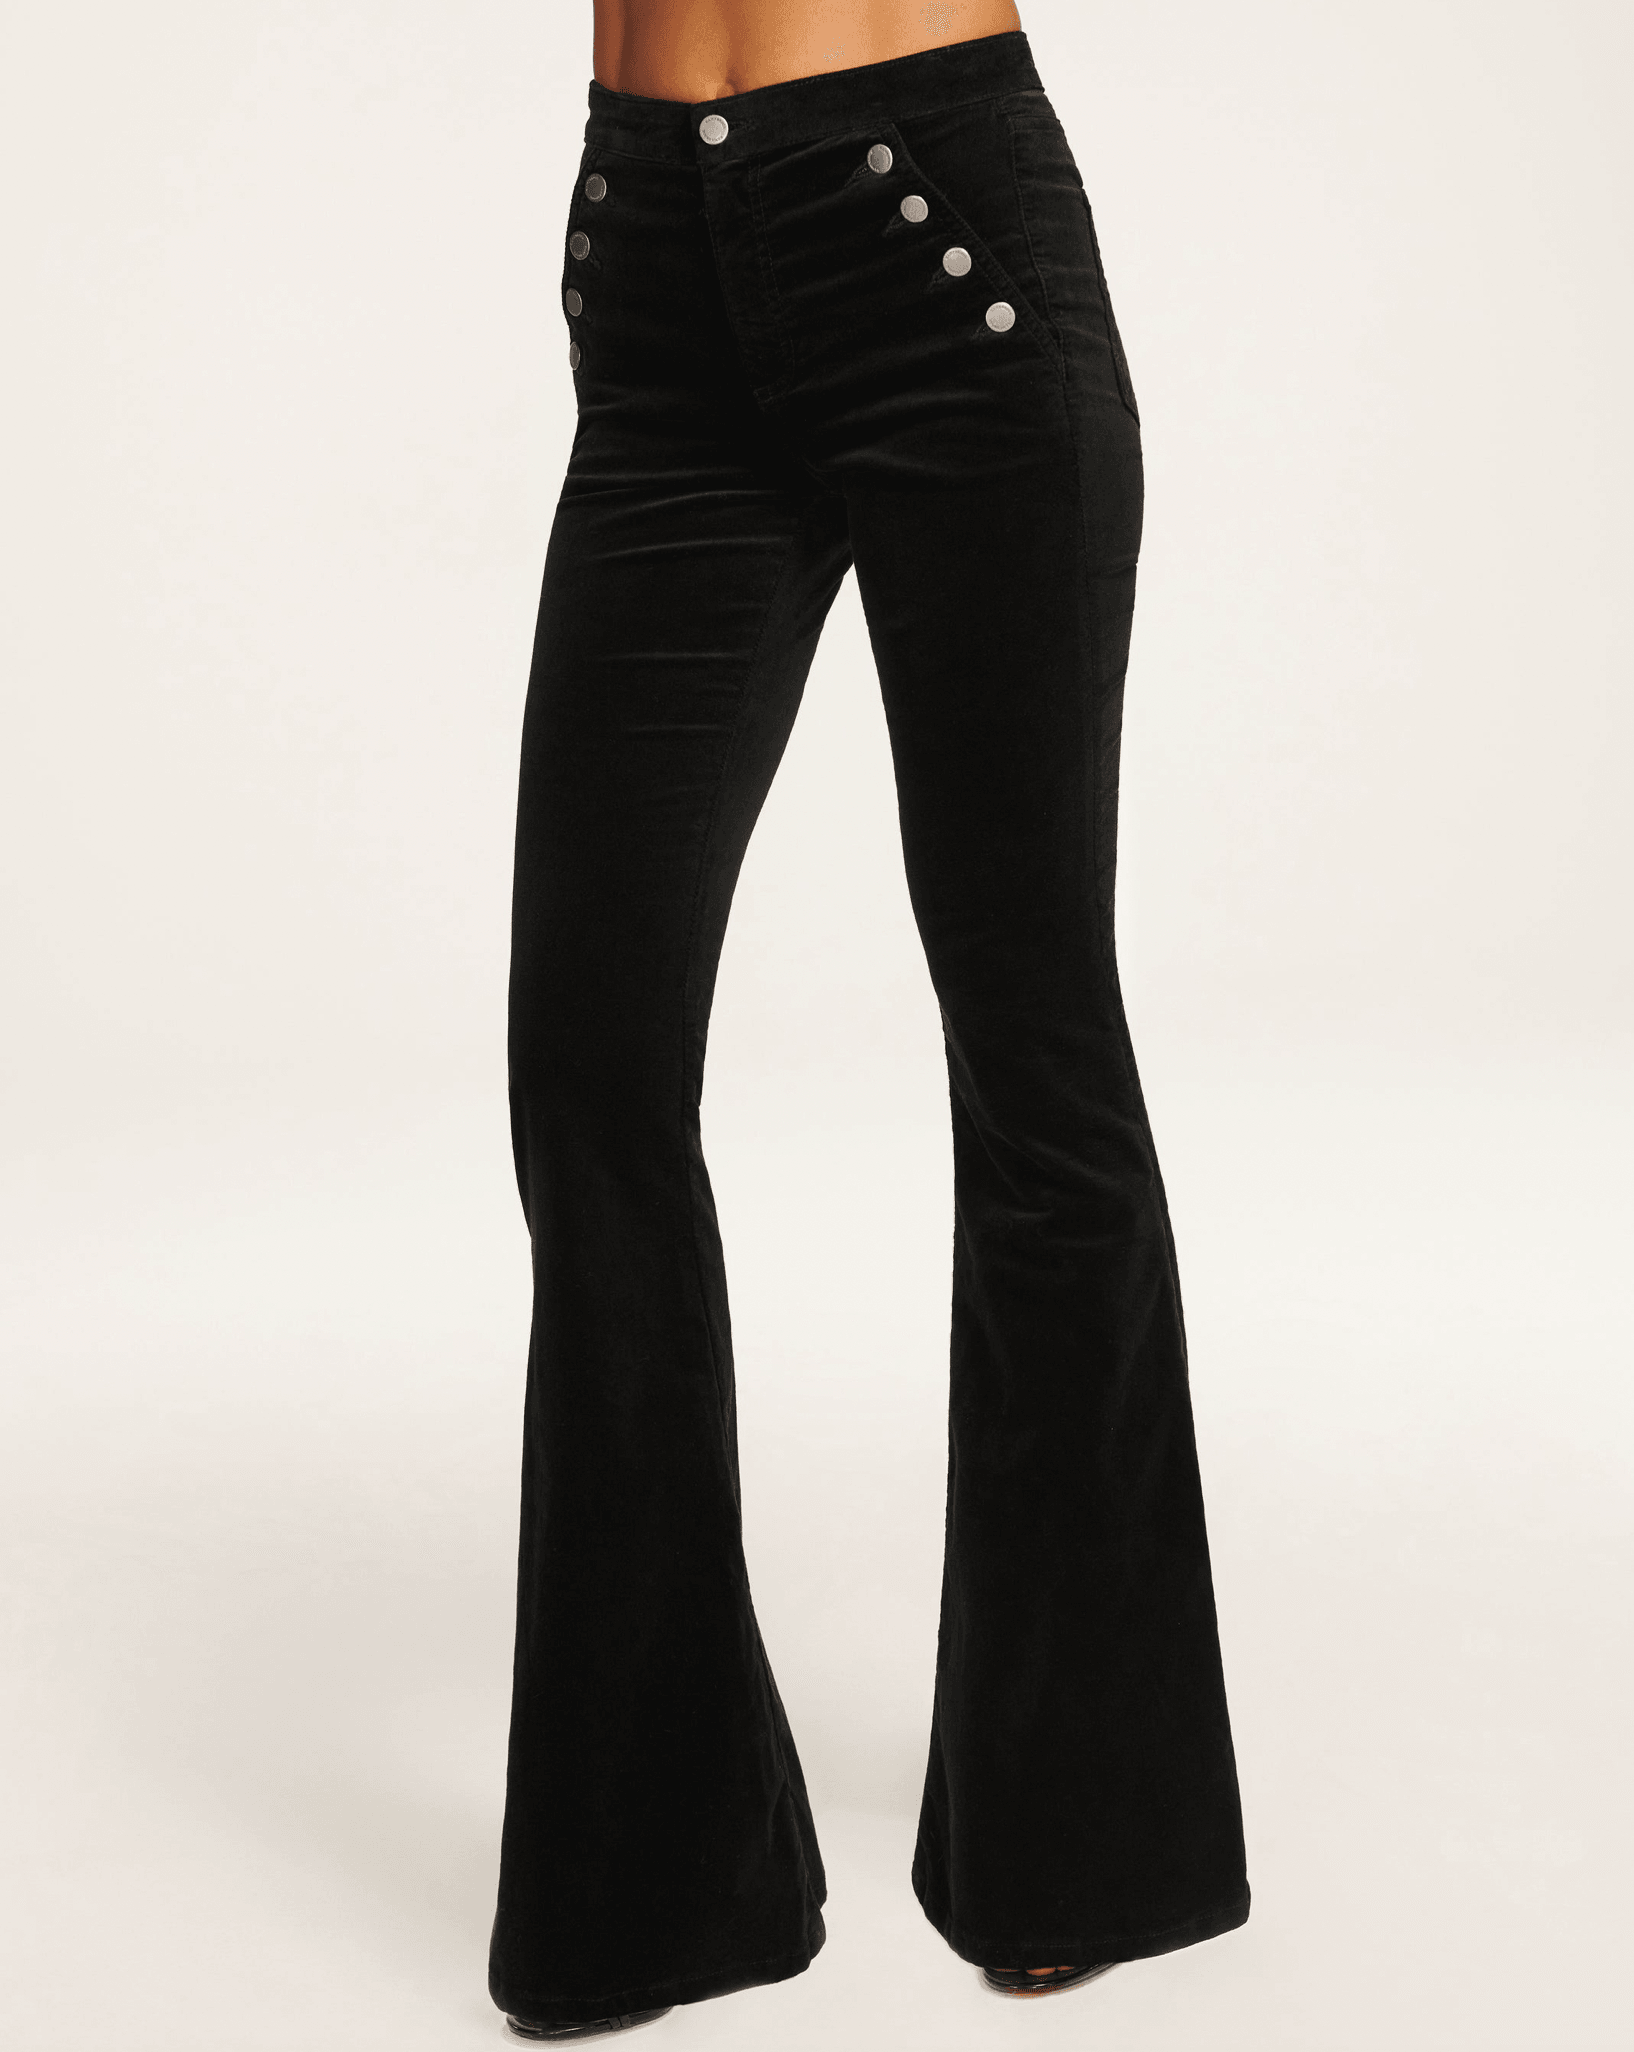 Helena High-Rise Velvet Flare Jean by Ramy Brook - Haven